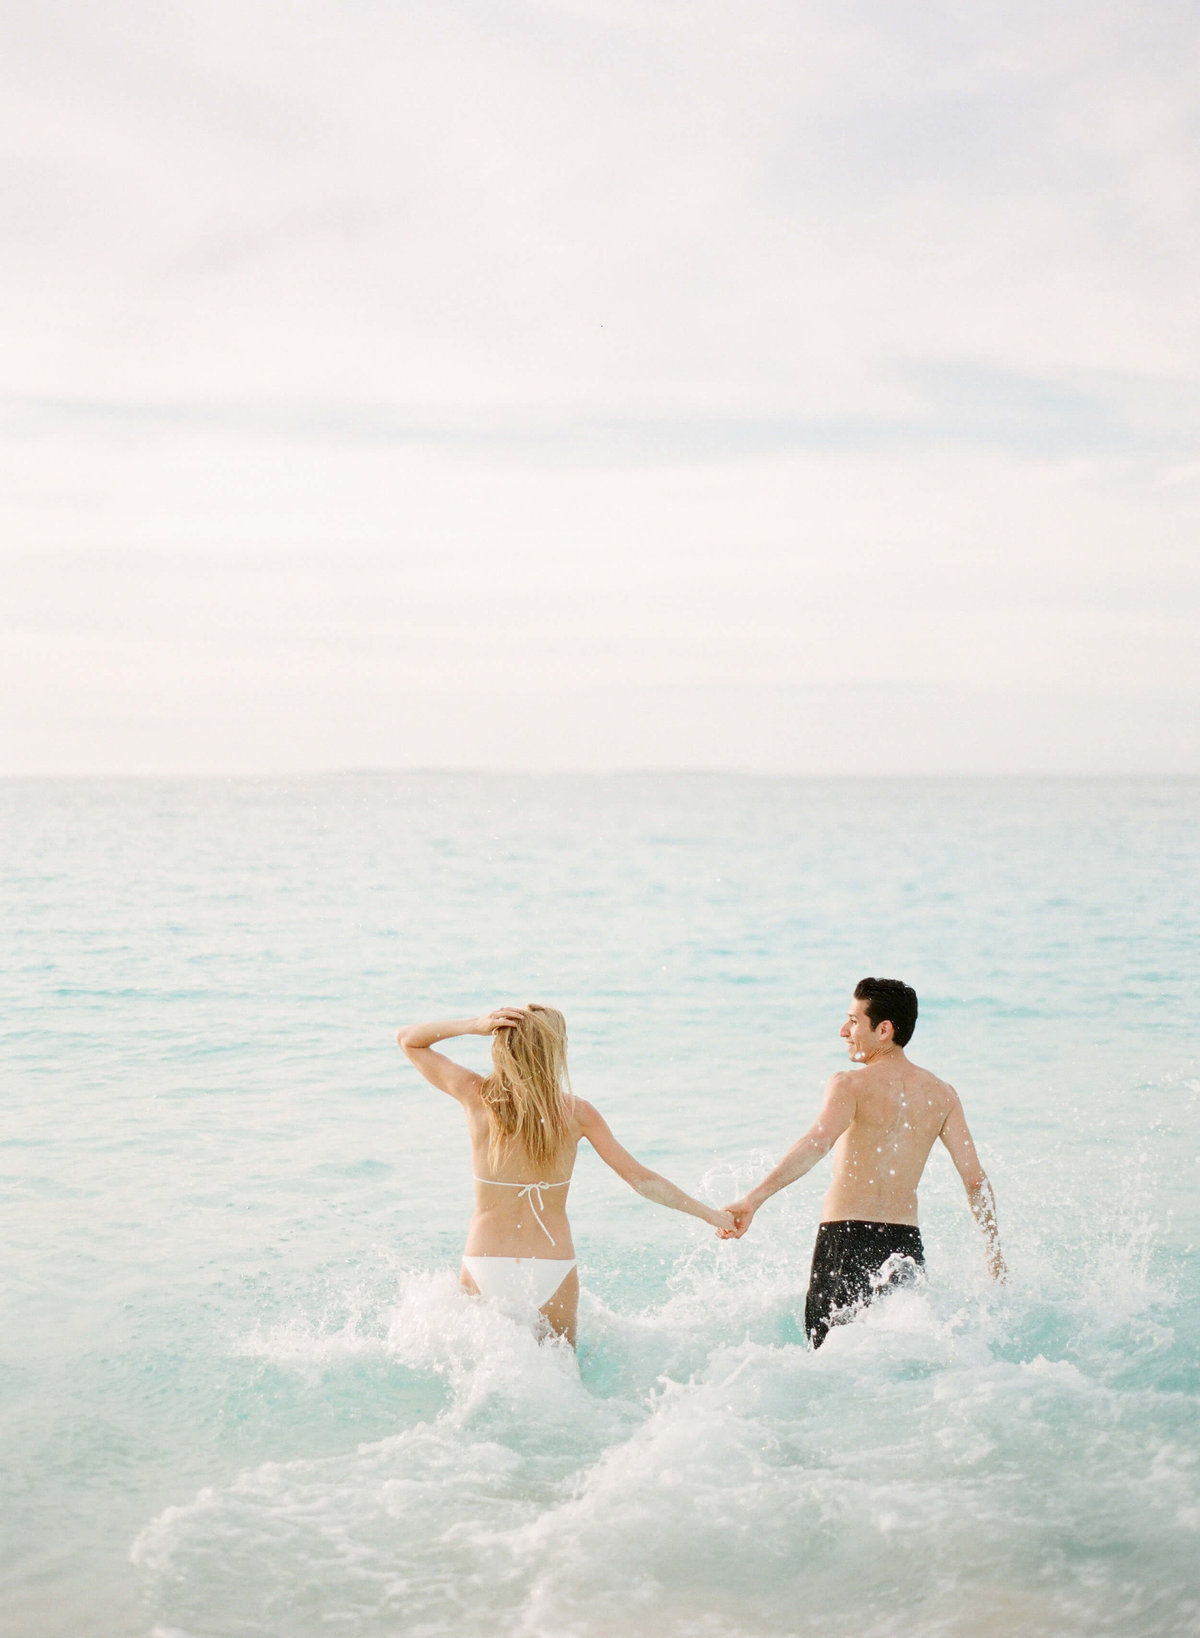 1-KTMerry-engagement-session-ocean-Anguilla